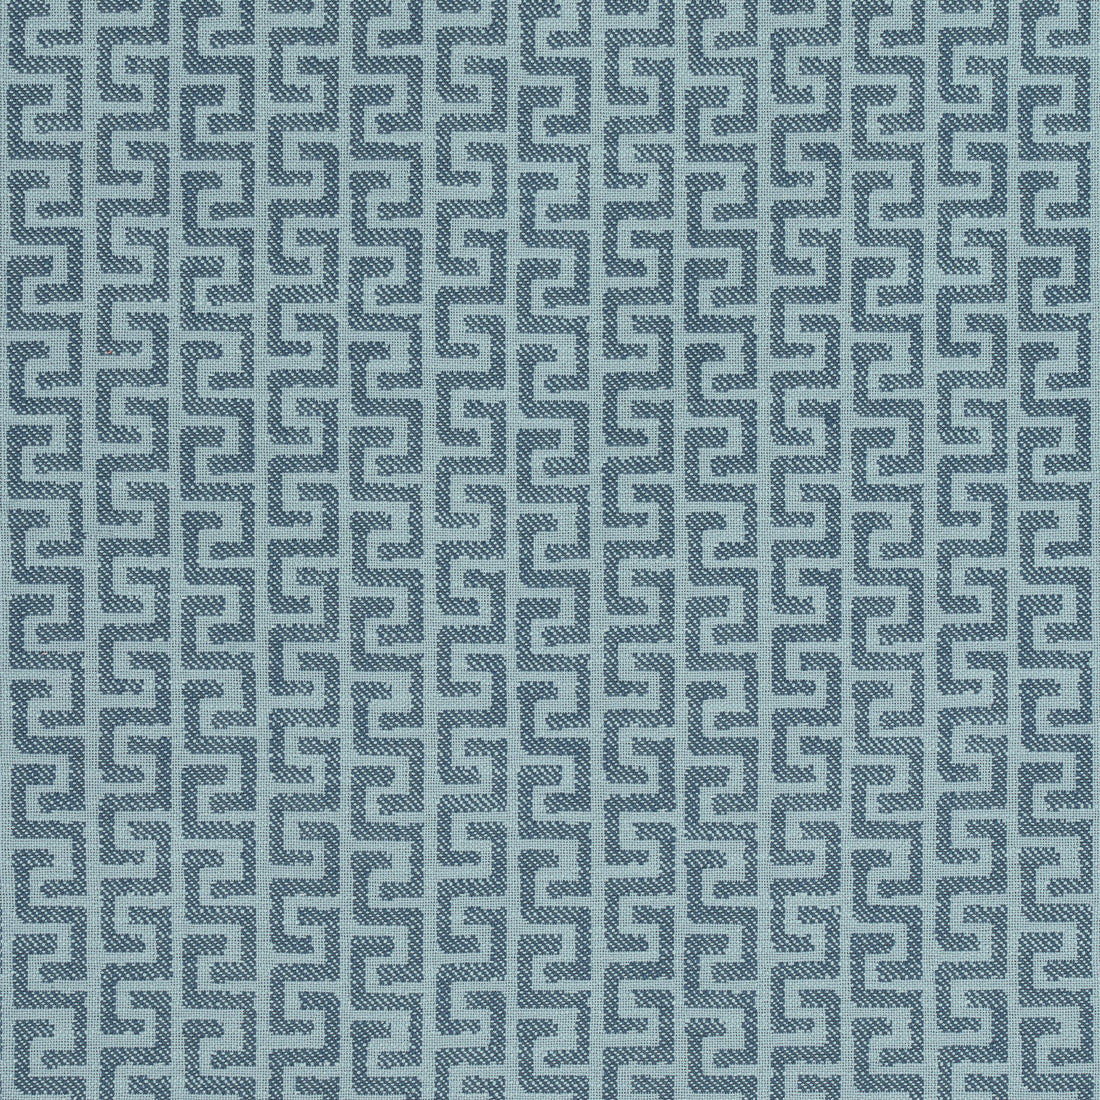 Merritt fabric in lake color - pattern number W74249 - by Thibaut in the Passage collection